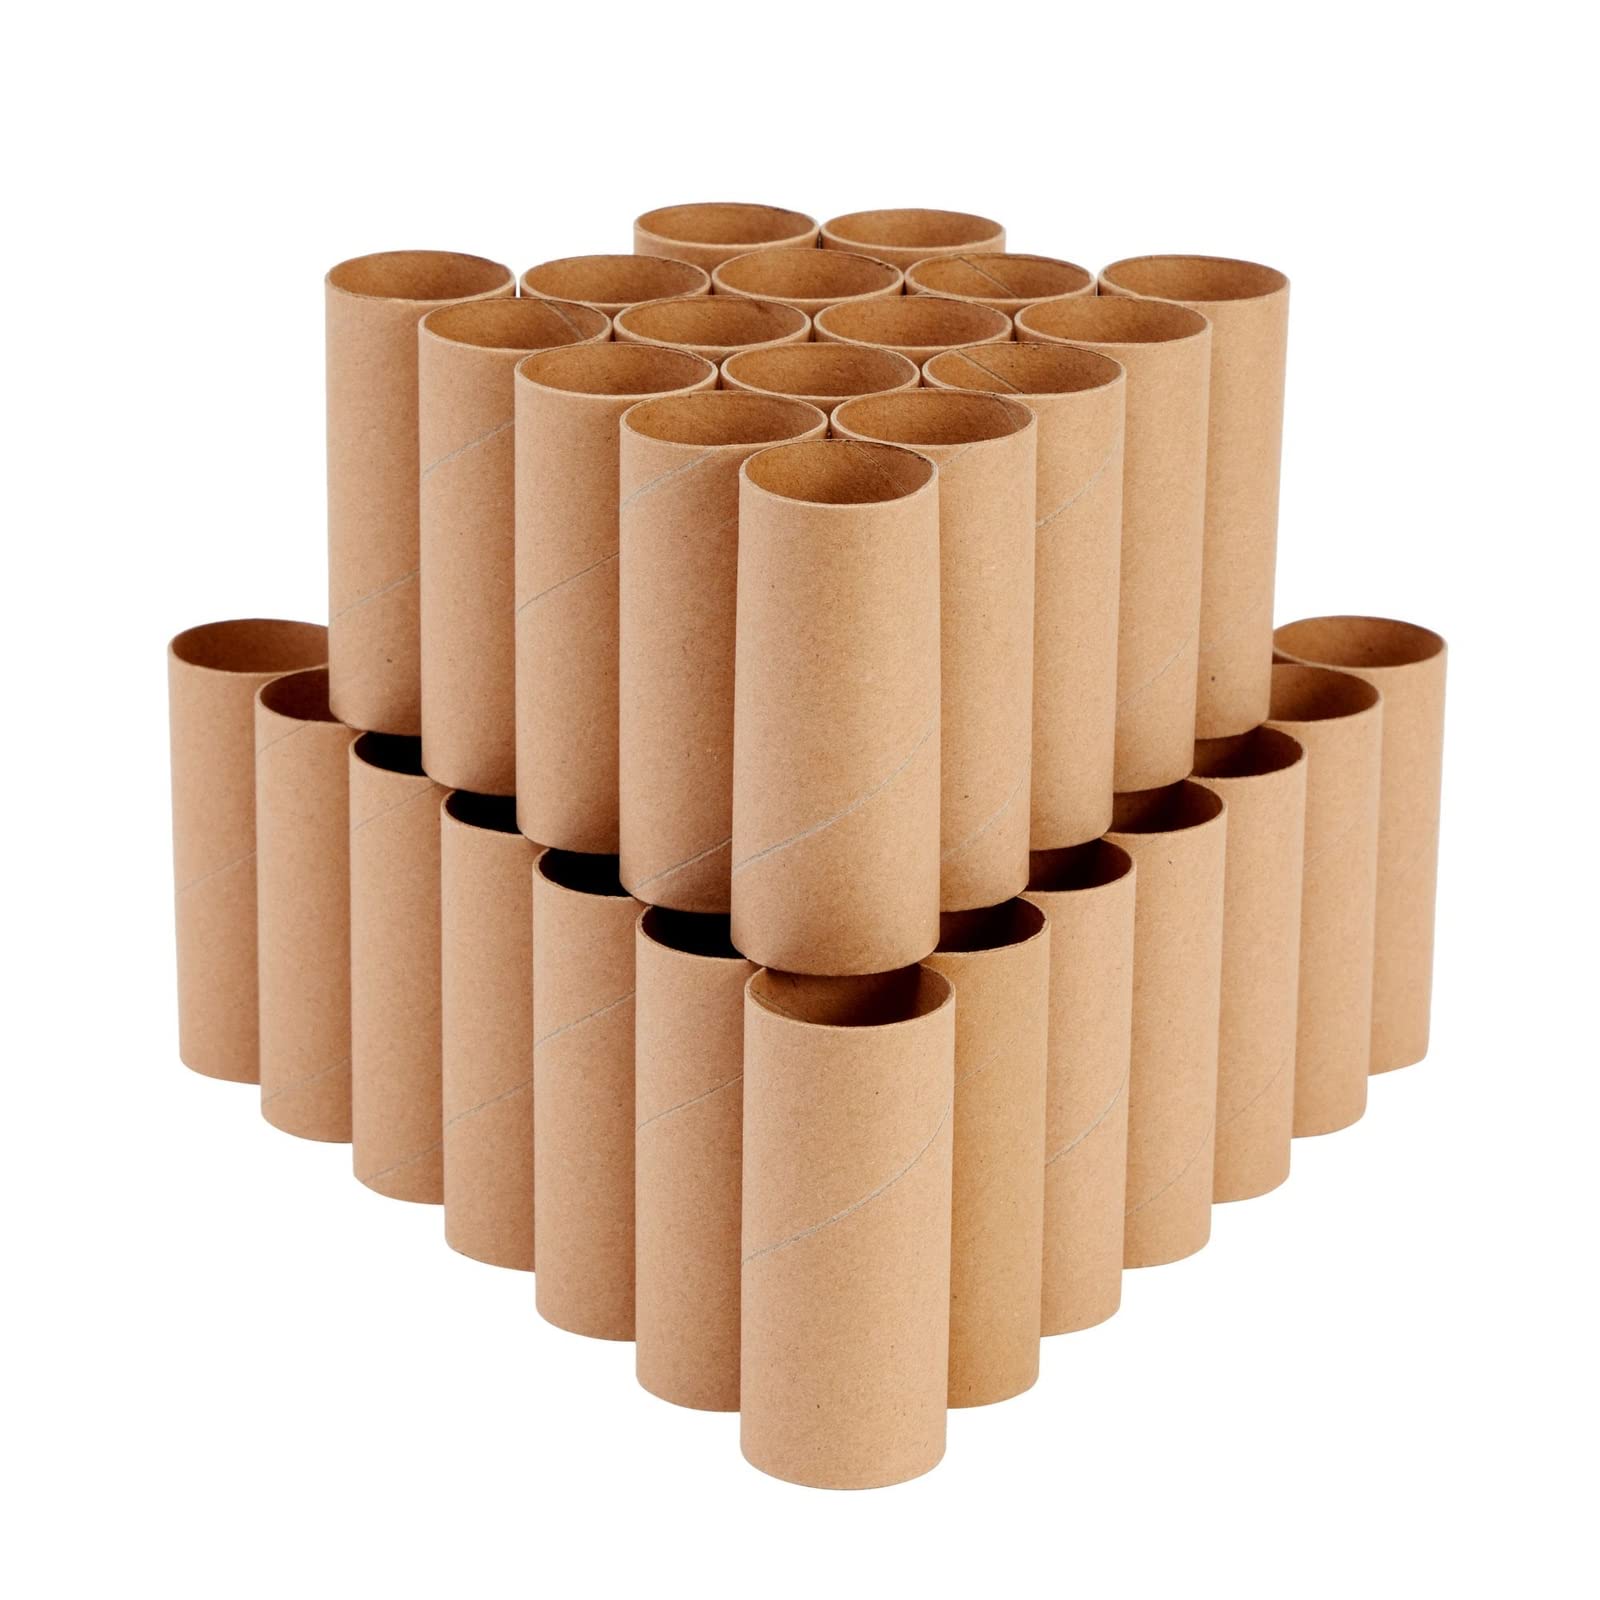 48 Pack Empty Toilet Paper Rolls for Crafts, Brown Cardboard Tubes for DIY, Classrooms, Dioramas (1.6 x 3.9 in)